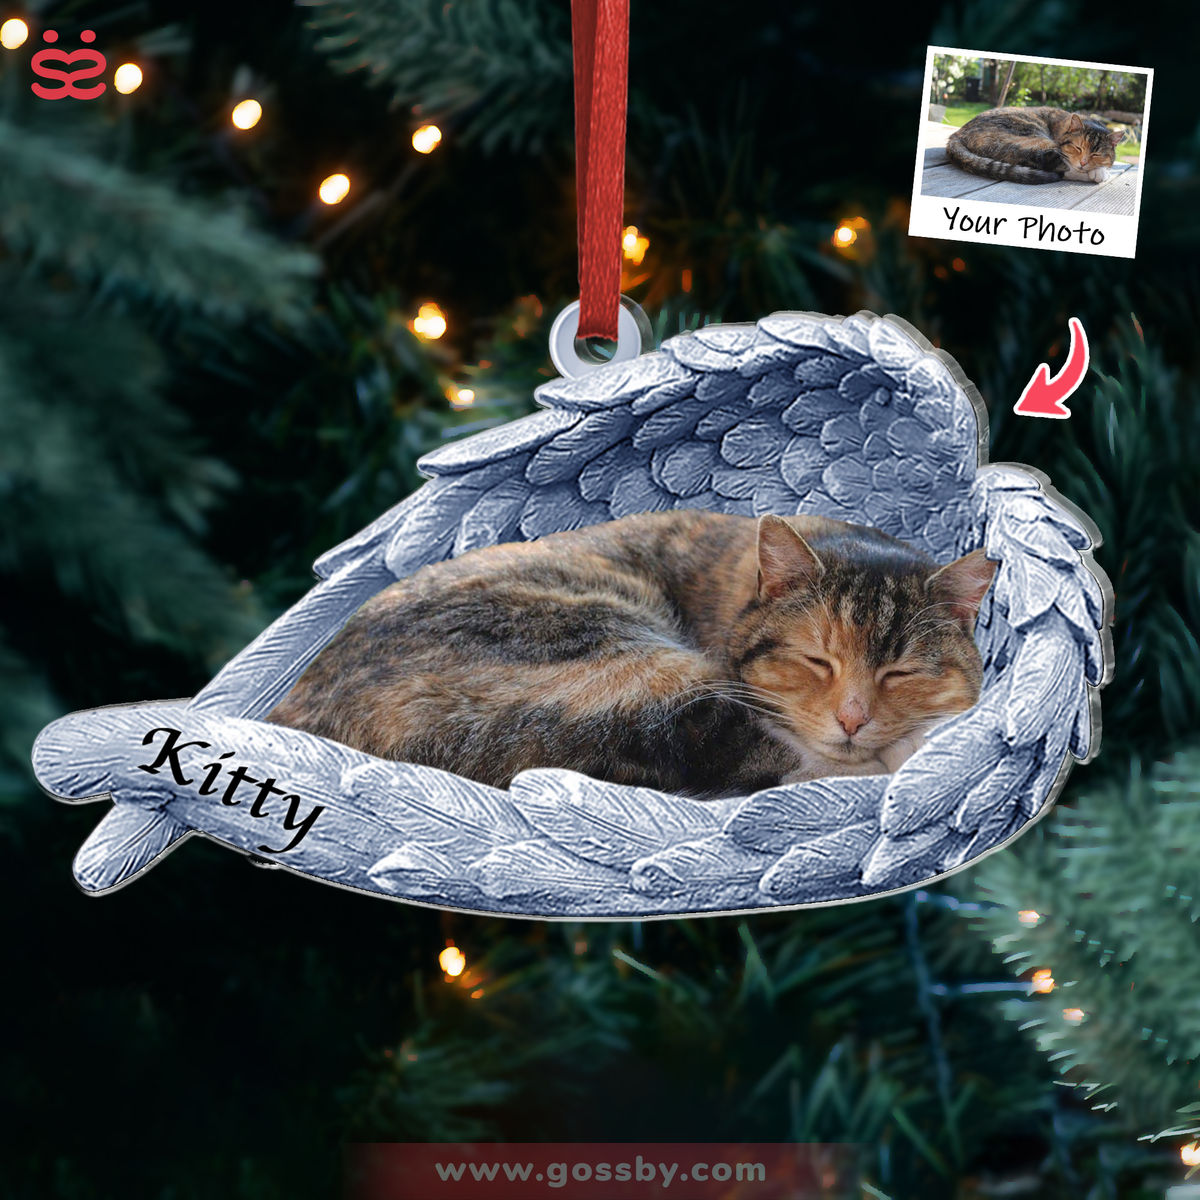 Dog Acrylic Ornament - Dog Lover Gifts - Sleeping Pet Within Angel